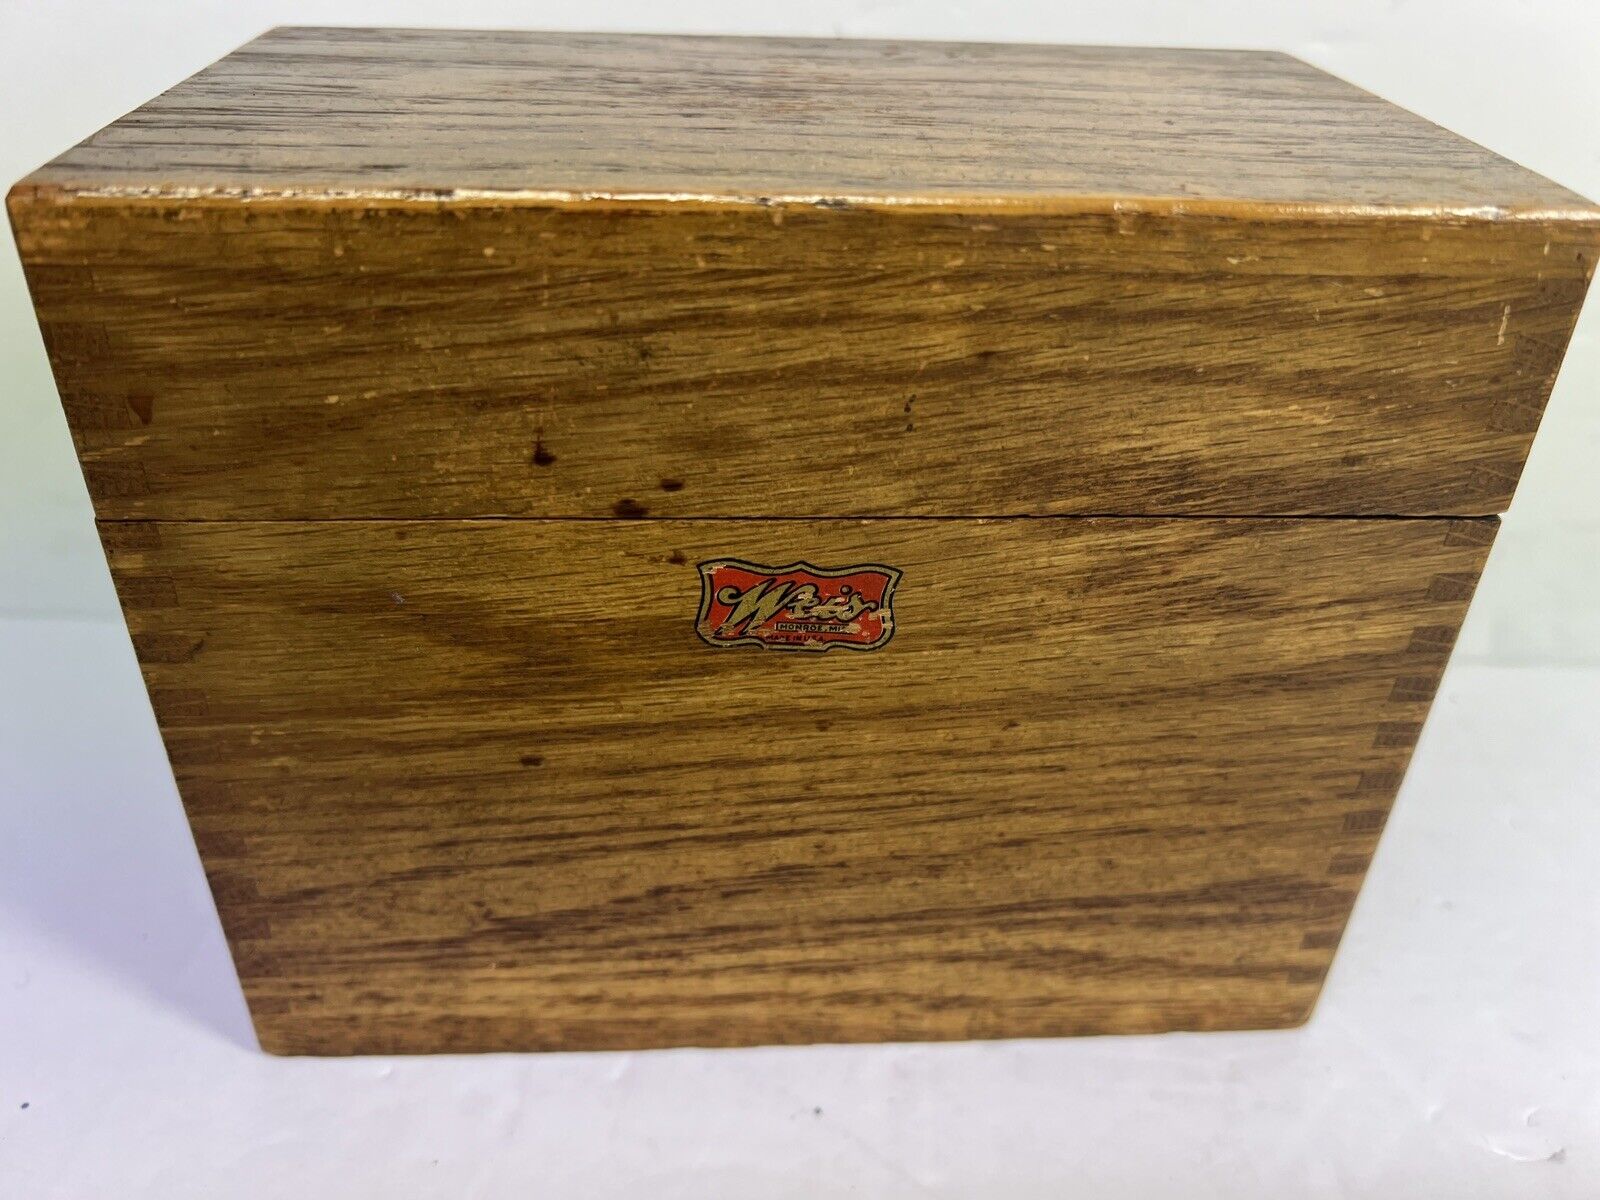 WEIS Vintage OAK Dovetailed Index Card File Box Recipe Wood Brass Hinges